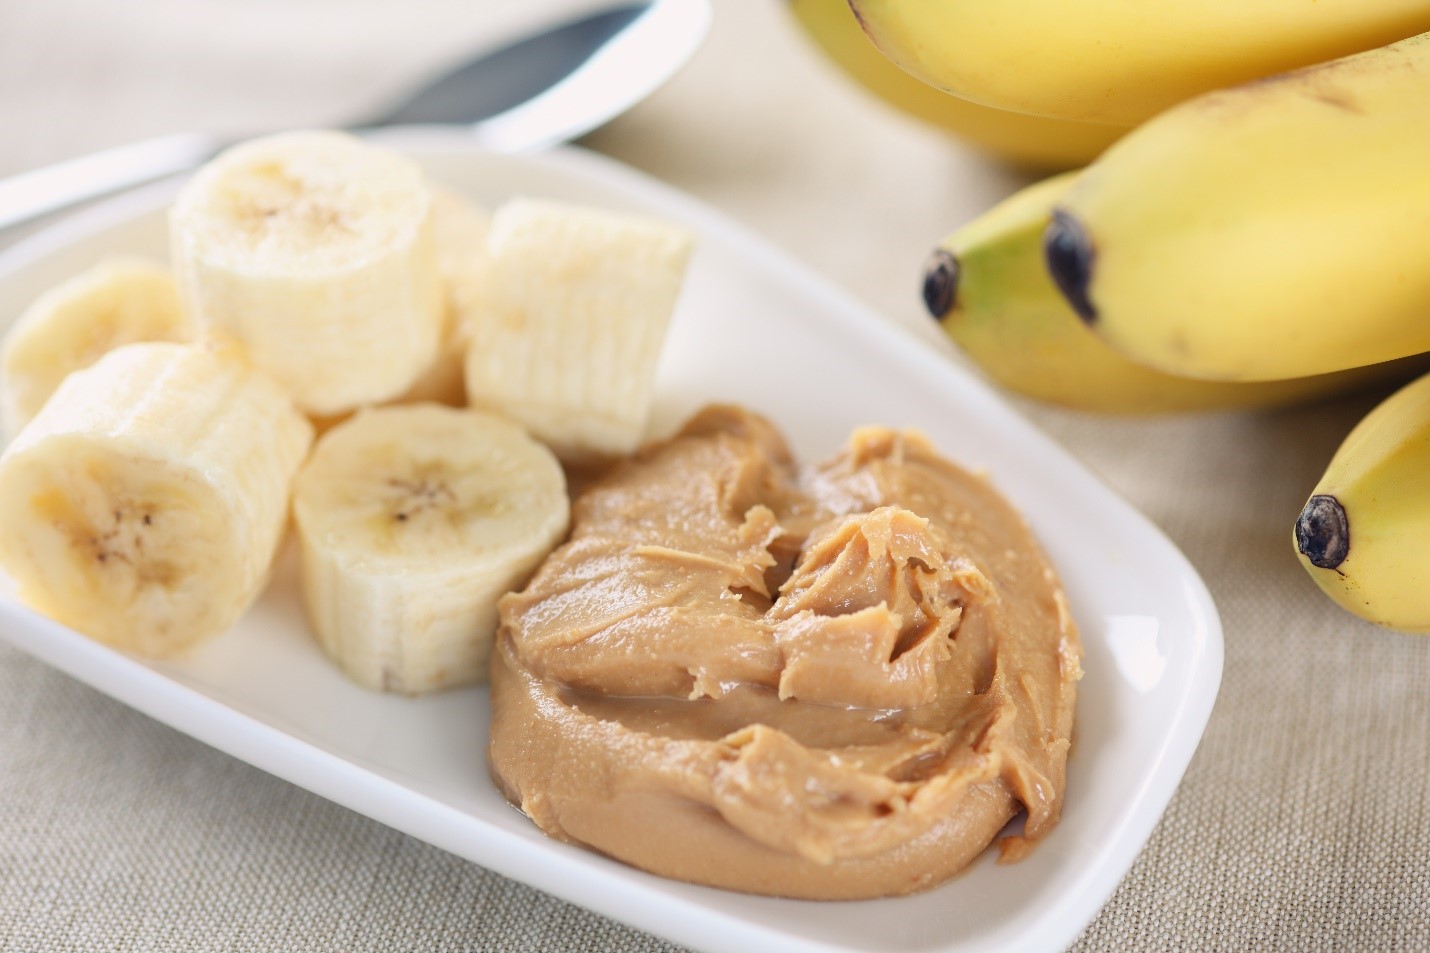 Bananas and almond butter